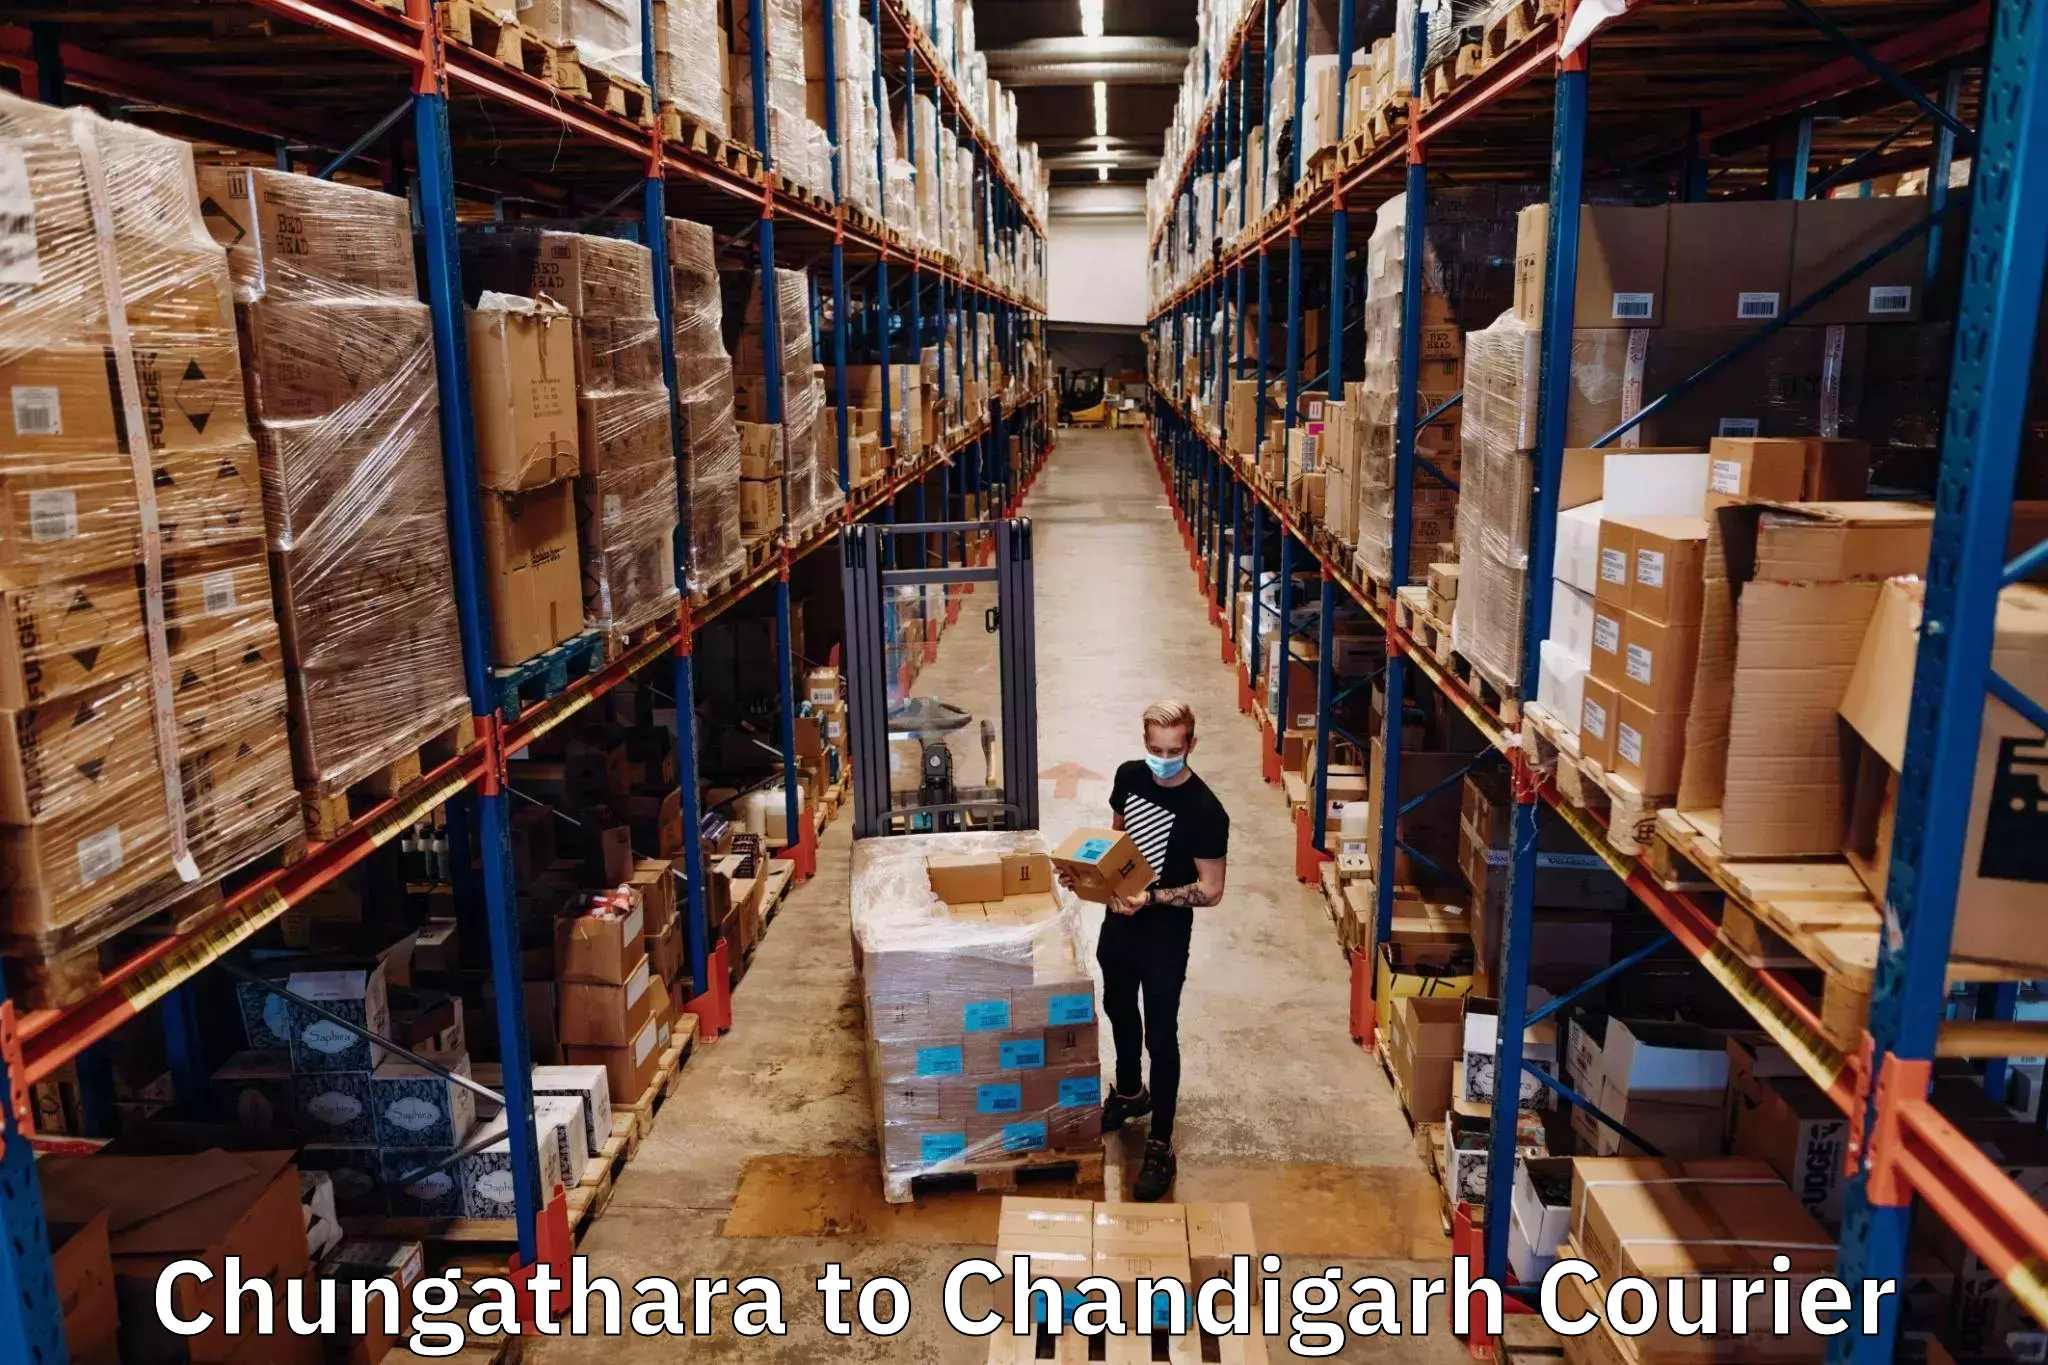 End-to-end delivery Chungathara to Chandigarh